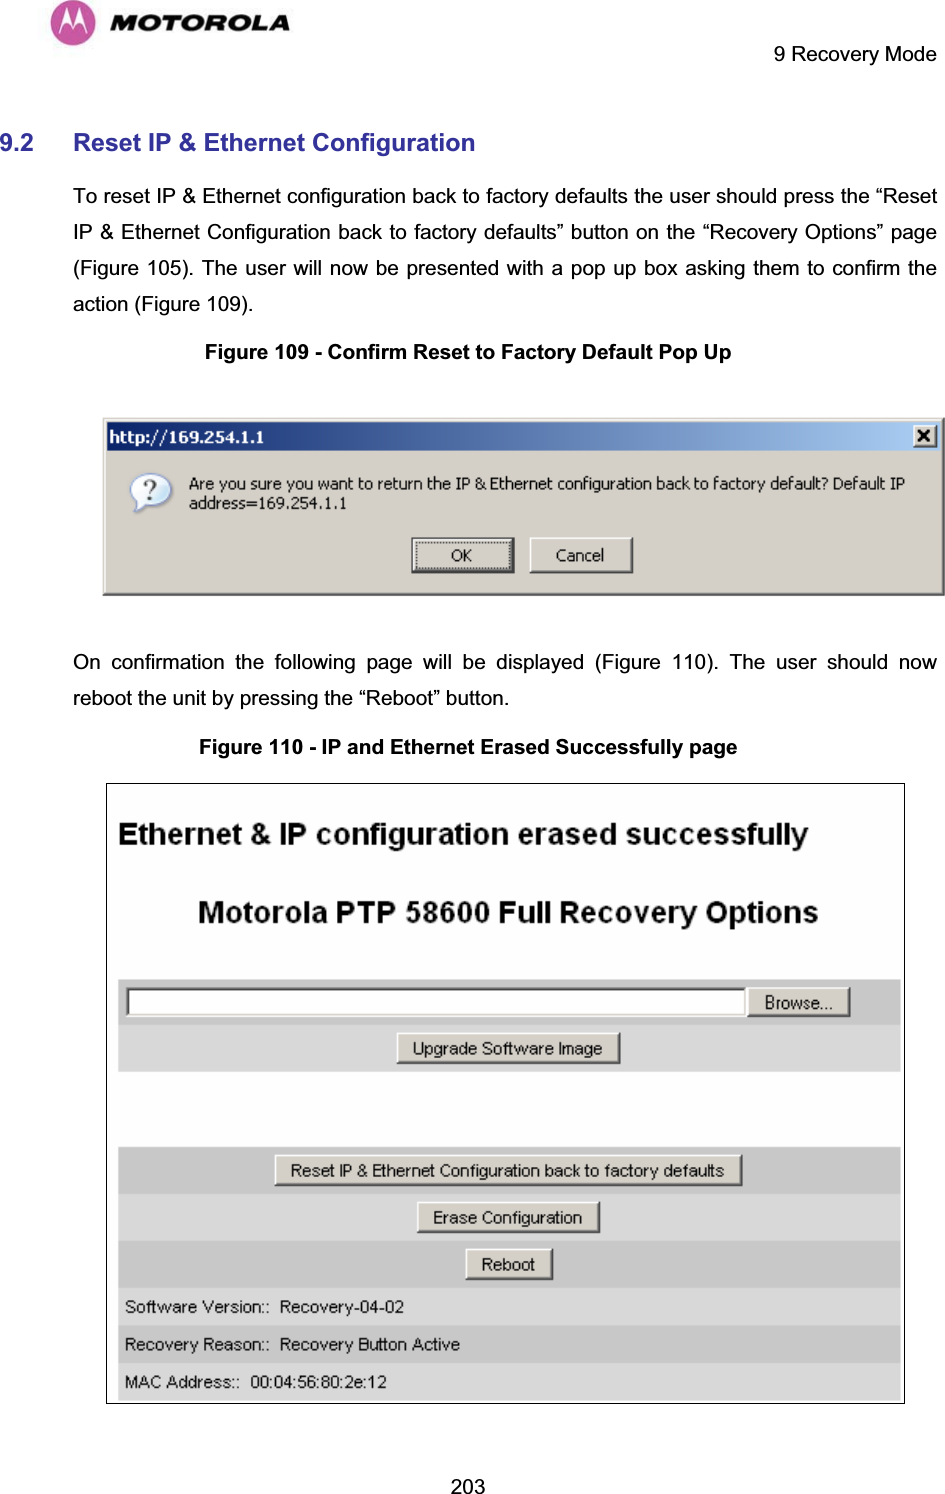     9 Recovery Mode  2039.2 Reset IP &amp; Ethernet Configuration To reset IP &amp; Ethernet configuration back to factory defaults the user should press the “Reset IP &amp; Ethernet Configuration back to factory defaults” button on the “Recovery Options” page (1Figure 105). The user will now be presented with a pop up box asking them to confirm the action (Figure 109). Figure 109 - Confirm Reset to Factory Default Pop Up  On confirmation the following page will be displayed (Figure 110). The user should now reboot the unit by pressing the “Reboot” button. Figure 110 - IP and Ethernet Erased Successfully page  